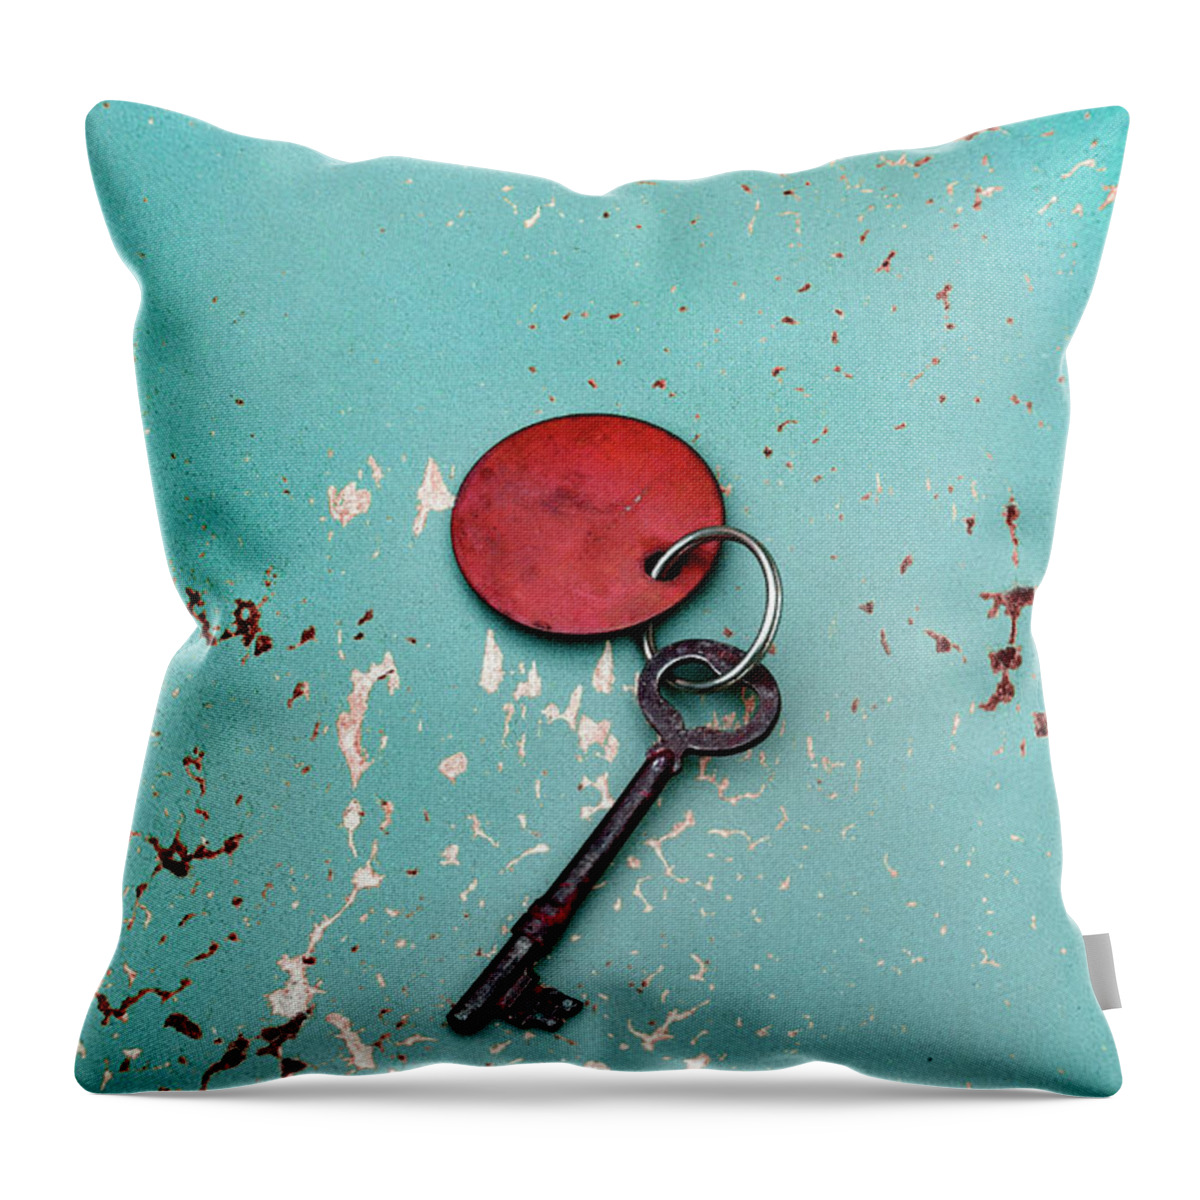 Key Throw Pillow featuring the photograph Vintage Key with Red Tag by Jill Battaglia